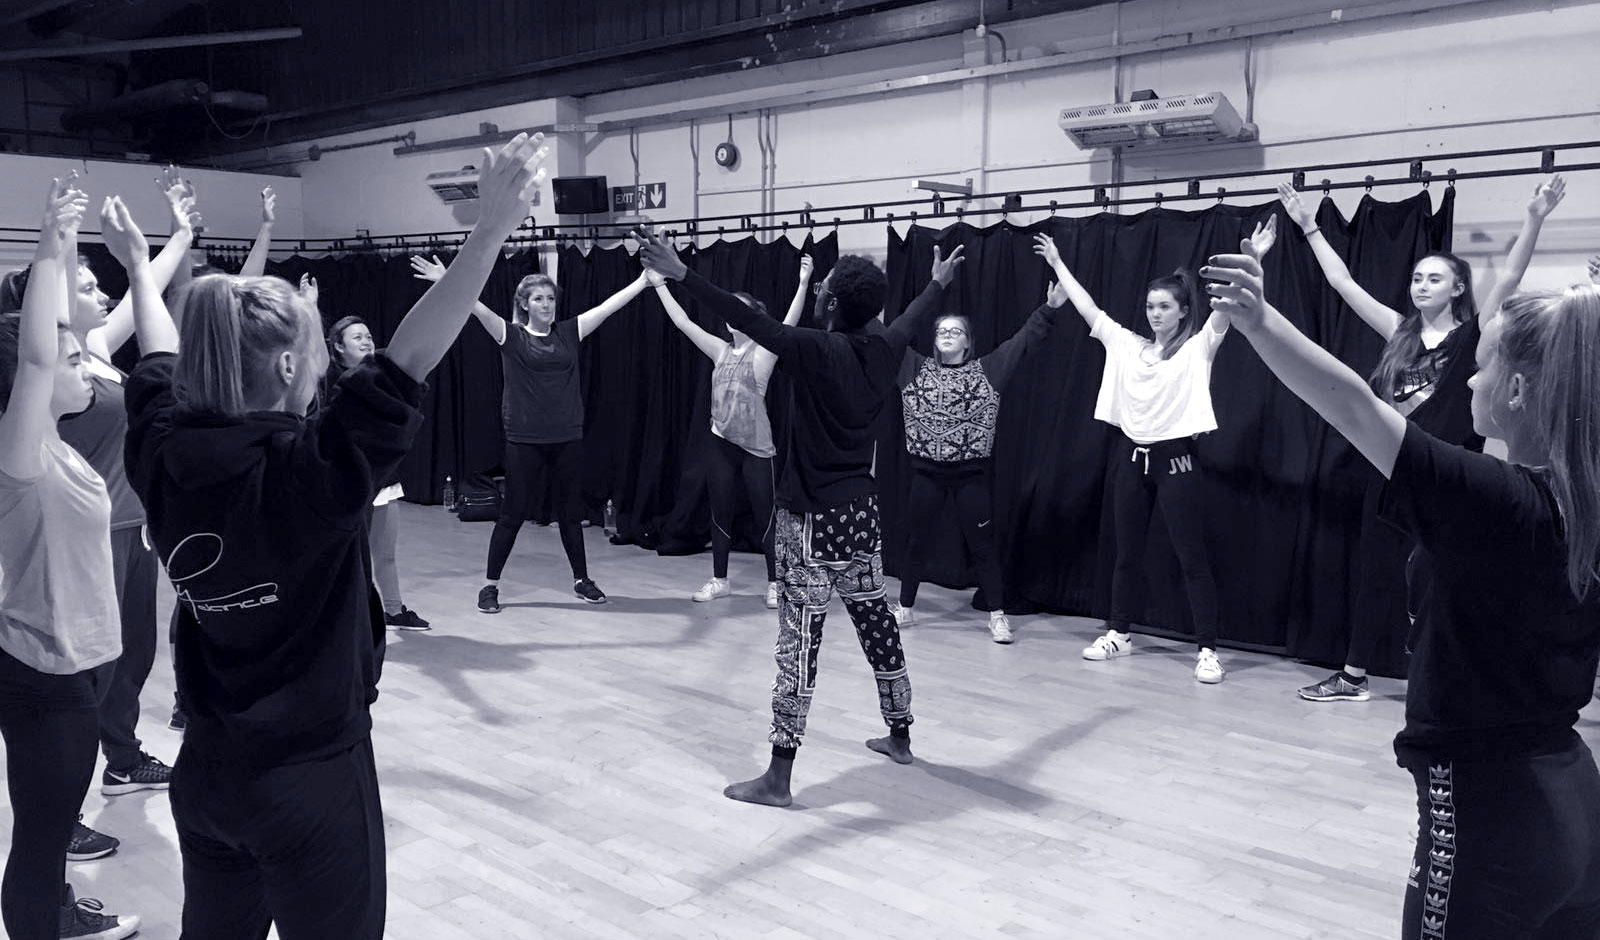 Dance sessions with local mental health charity Oxfordshire MIND